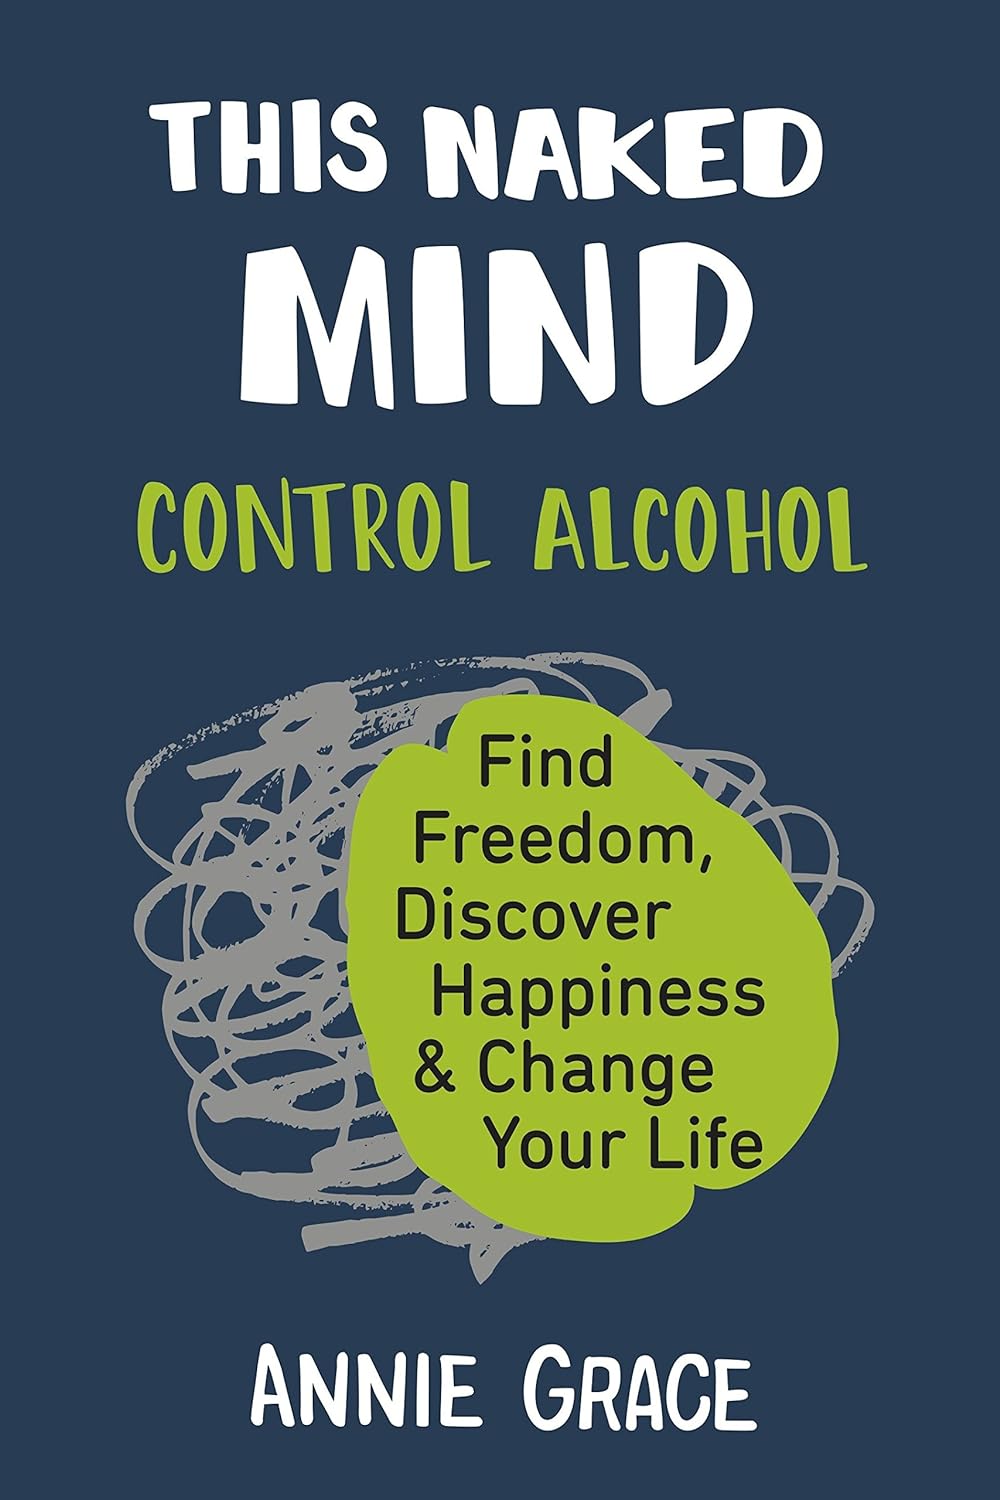 <p><a href="https://thisnakedmind.com/annie-grace/">Annie Grace</a> is a two-time author and sobriety coach who became interested in this topic after quitting alcohol herself. In <a href="https://www.amazon.com/This-Naked-Mind-Discover-Happiness/dp/0525537236/?tag=skmsn-20"><em>This Naked Mind</em></a>, she draws on recent scientific research and her own lived experience in the hopes of helping others ditch drinking. Grace also unpacks her tried-and-true approach to sobriety, which focuses on “positive desire” and personal empowerment instead of scare tactics or shame. It’s no wonder<em> This Naked Mind</em> is an enduring bestseller in Amazon’s Alcoholism Recovery category.</p> <a href="https://www.amazon.com/dp/0525537236?tag=skmsn-20&linkCode=ogi&th=1&psc=1&language=en_US&asc_source=web&asc_campaign=web&asc_refurl=https%3A%2F%2Fwww.sheknows.com%2F%3Fpost_type%3Dpmc-gallery%26p%3D2892532" rel="nofollow">Buy: 'This Naked Mind' $9.95</a>